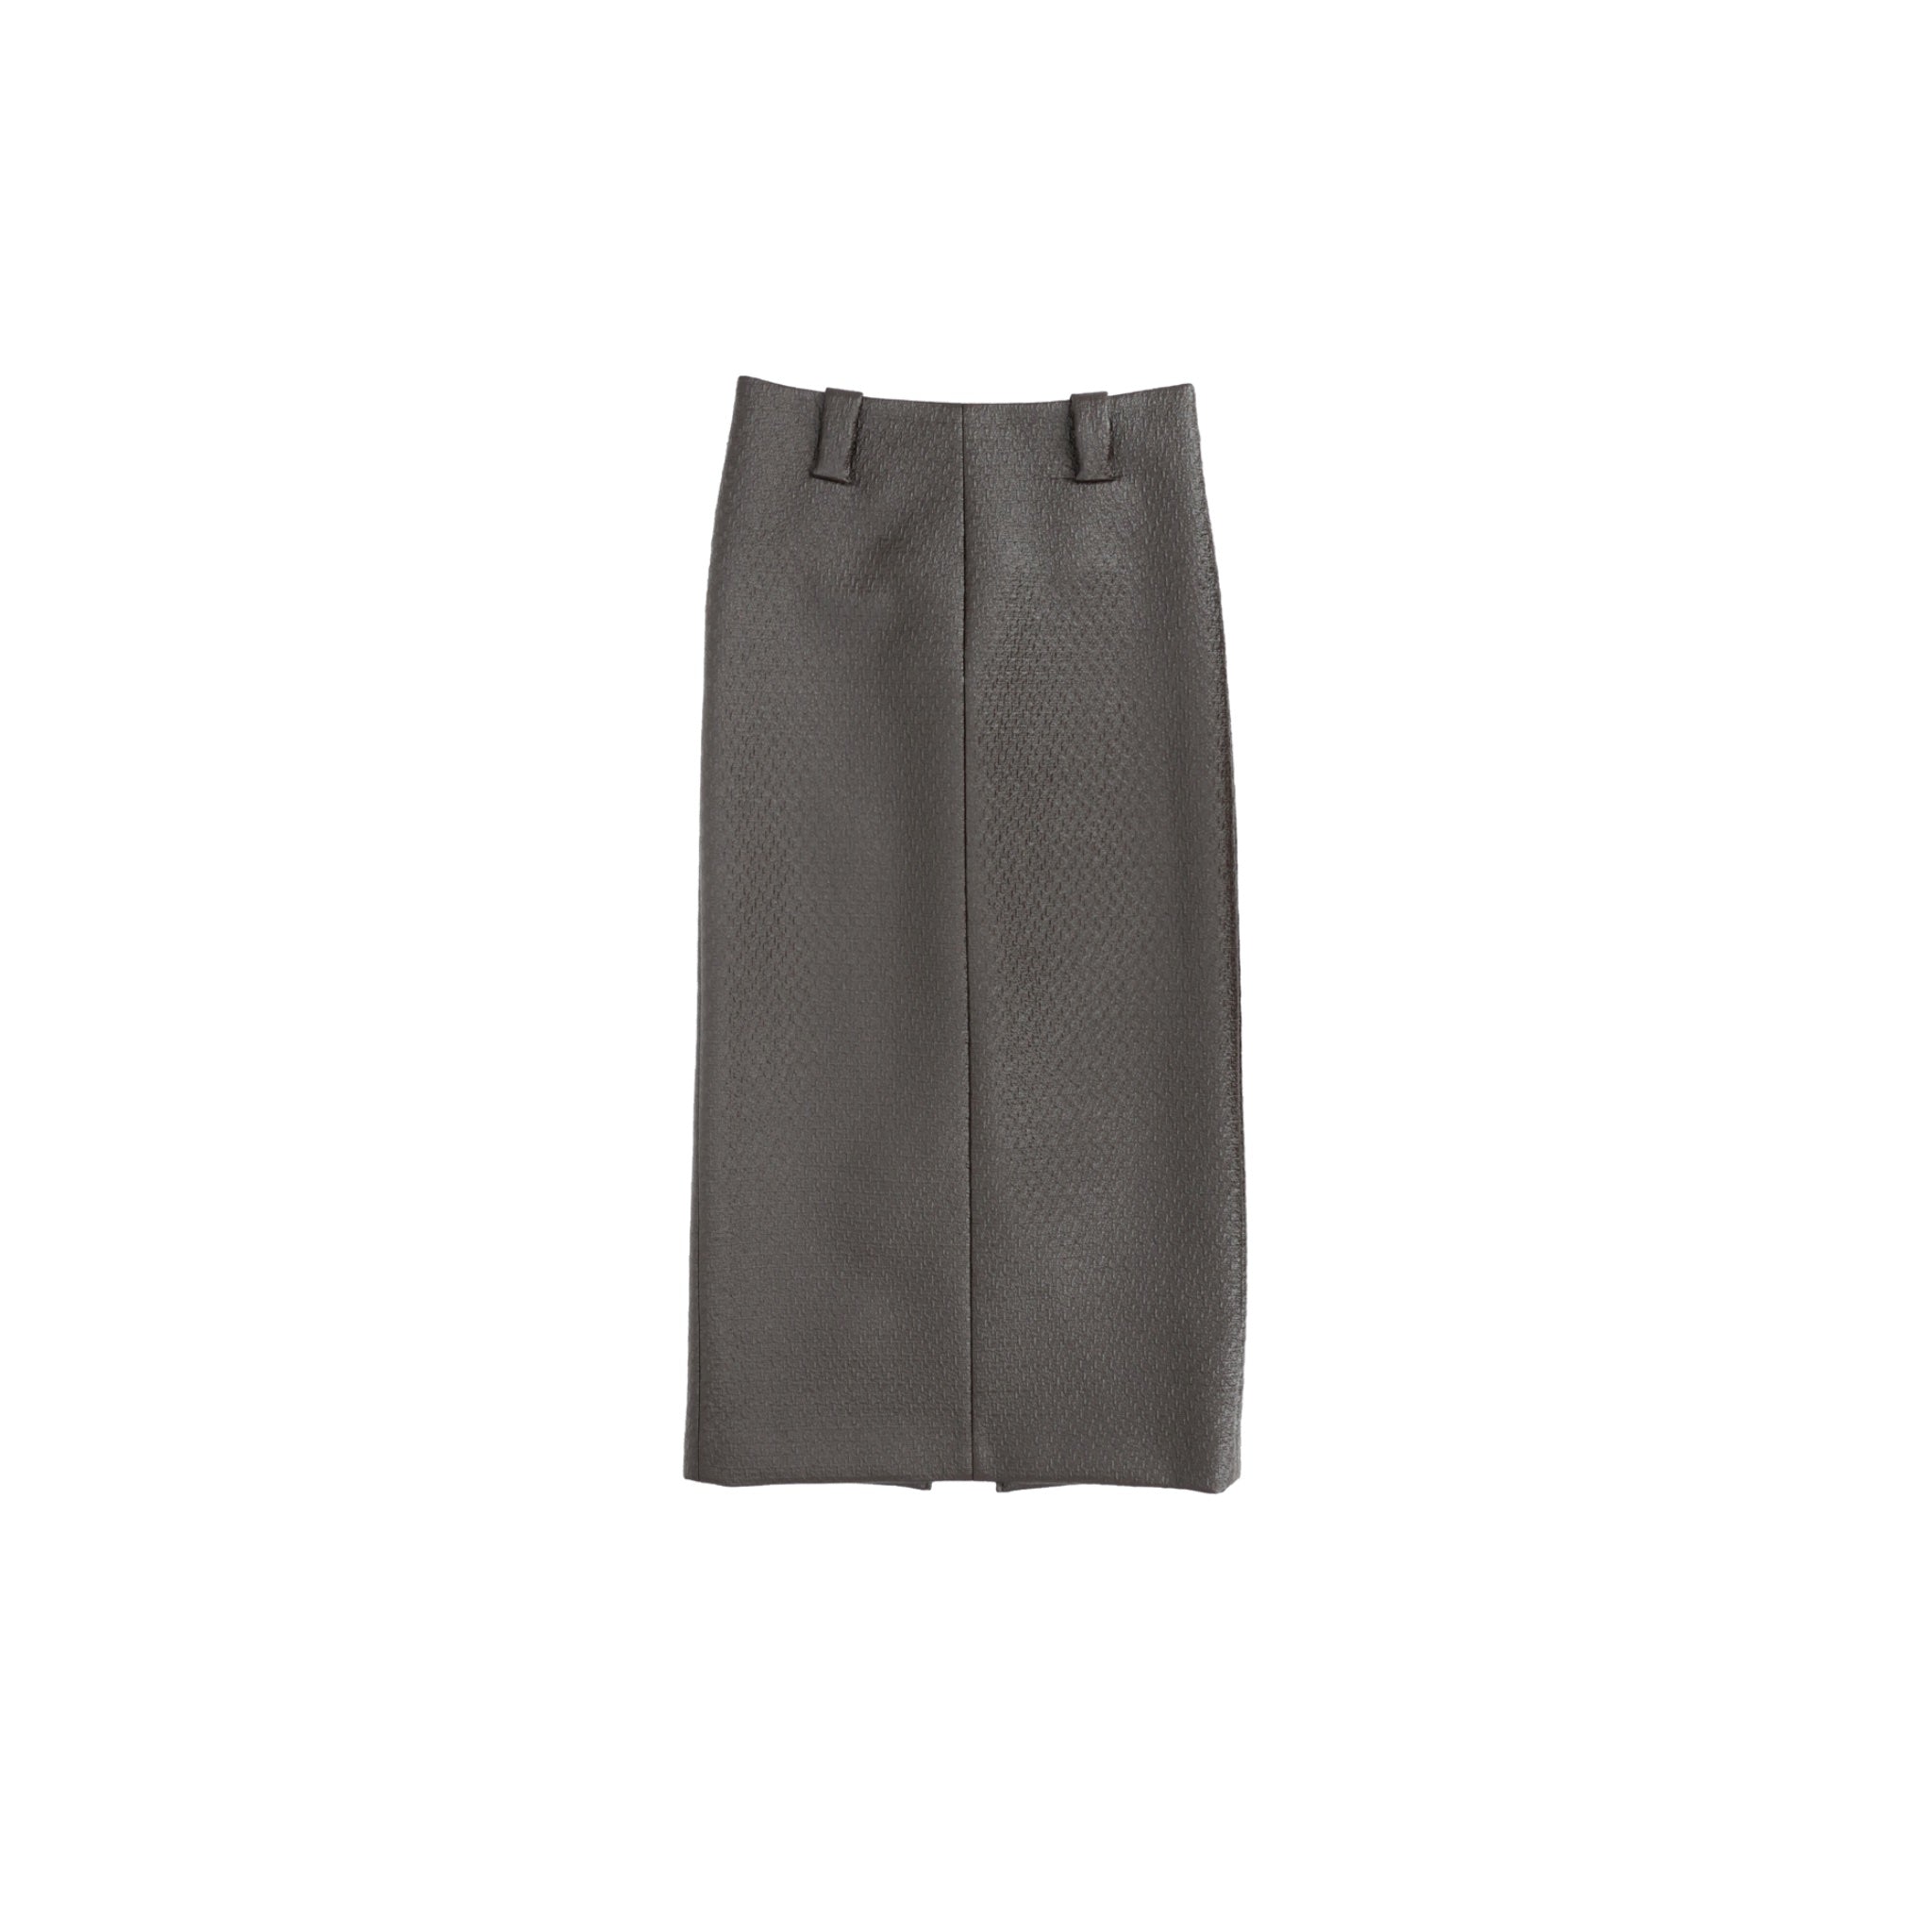 ilEWUOY Textured Faux Leather Long Skirt in Brown | MADA IN CHINA